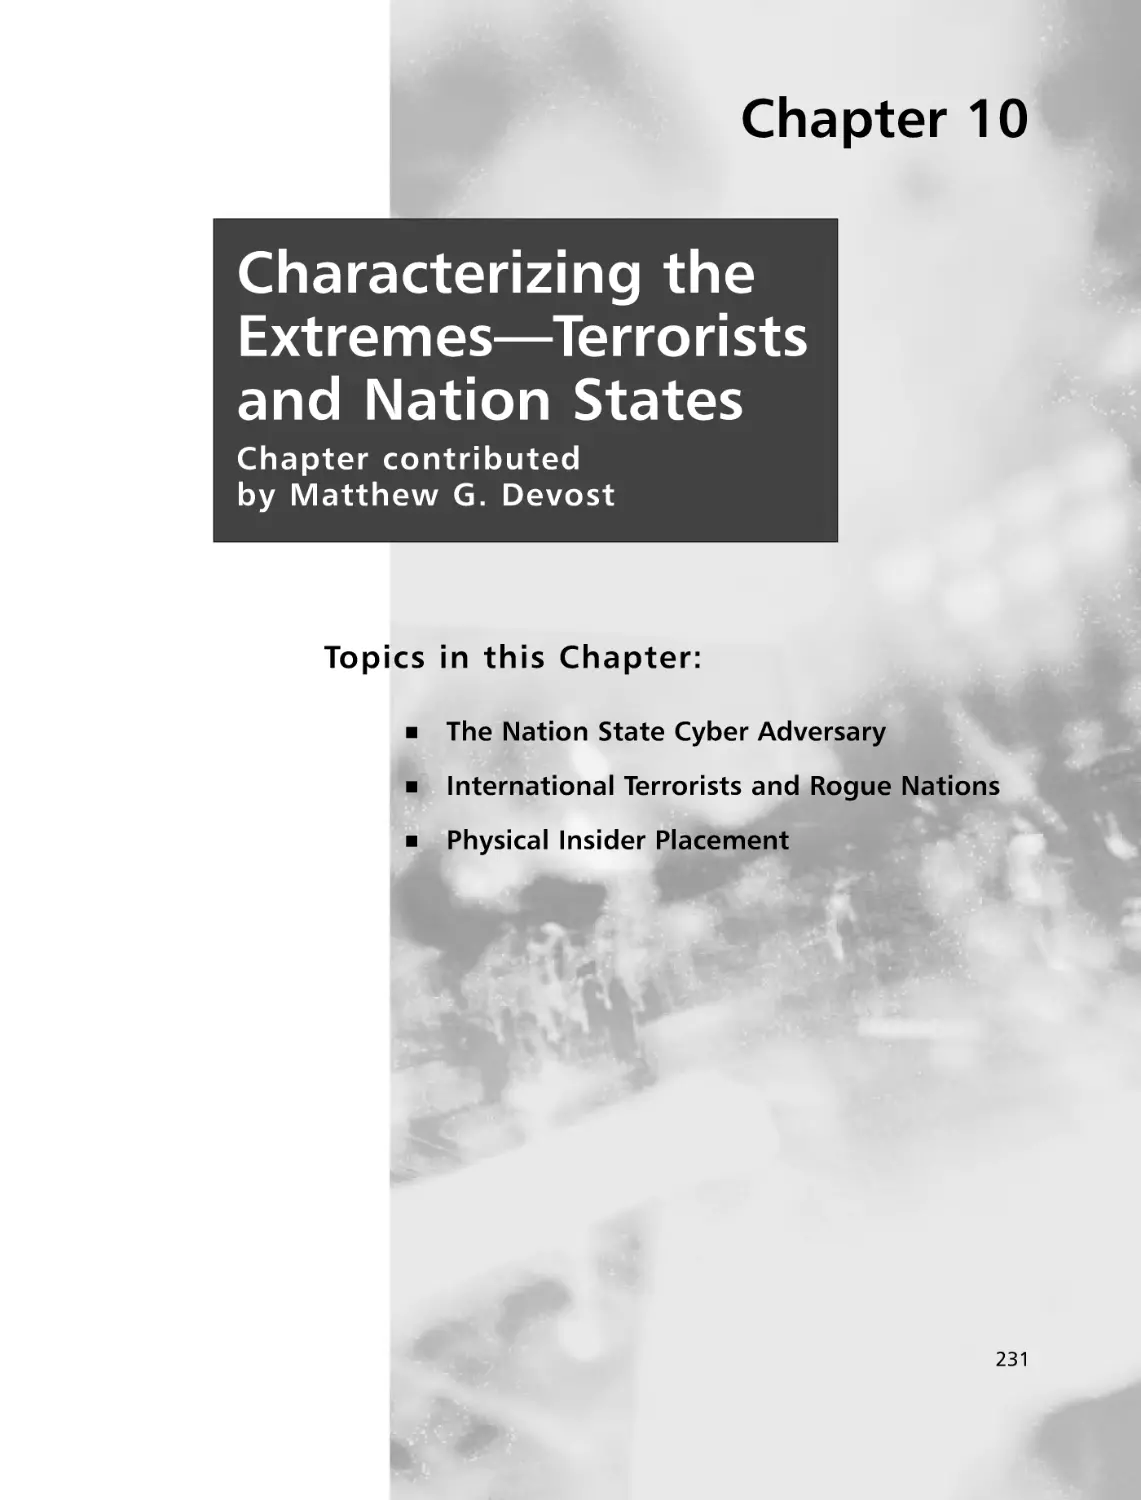 Chapter 10 Characterizing the Extremes-Terrorists and Nation States